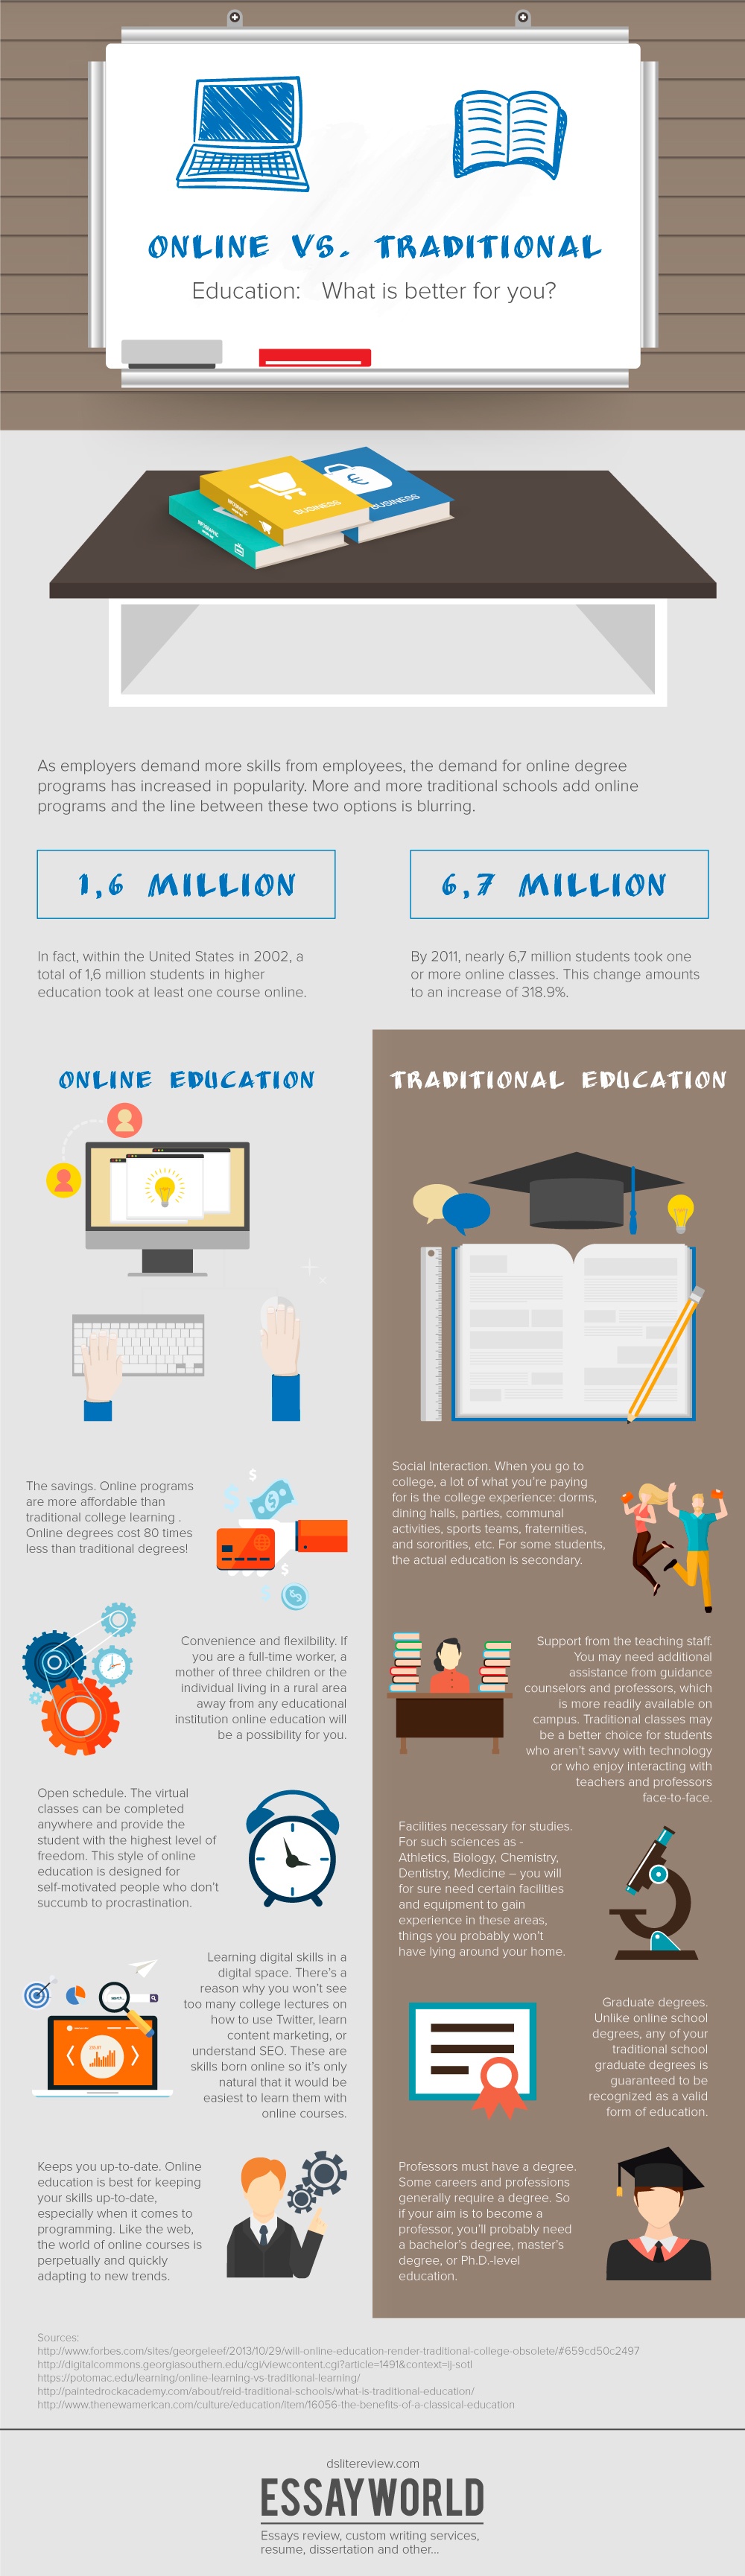 Online vs Traditional Education Infographic